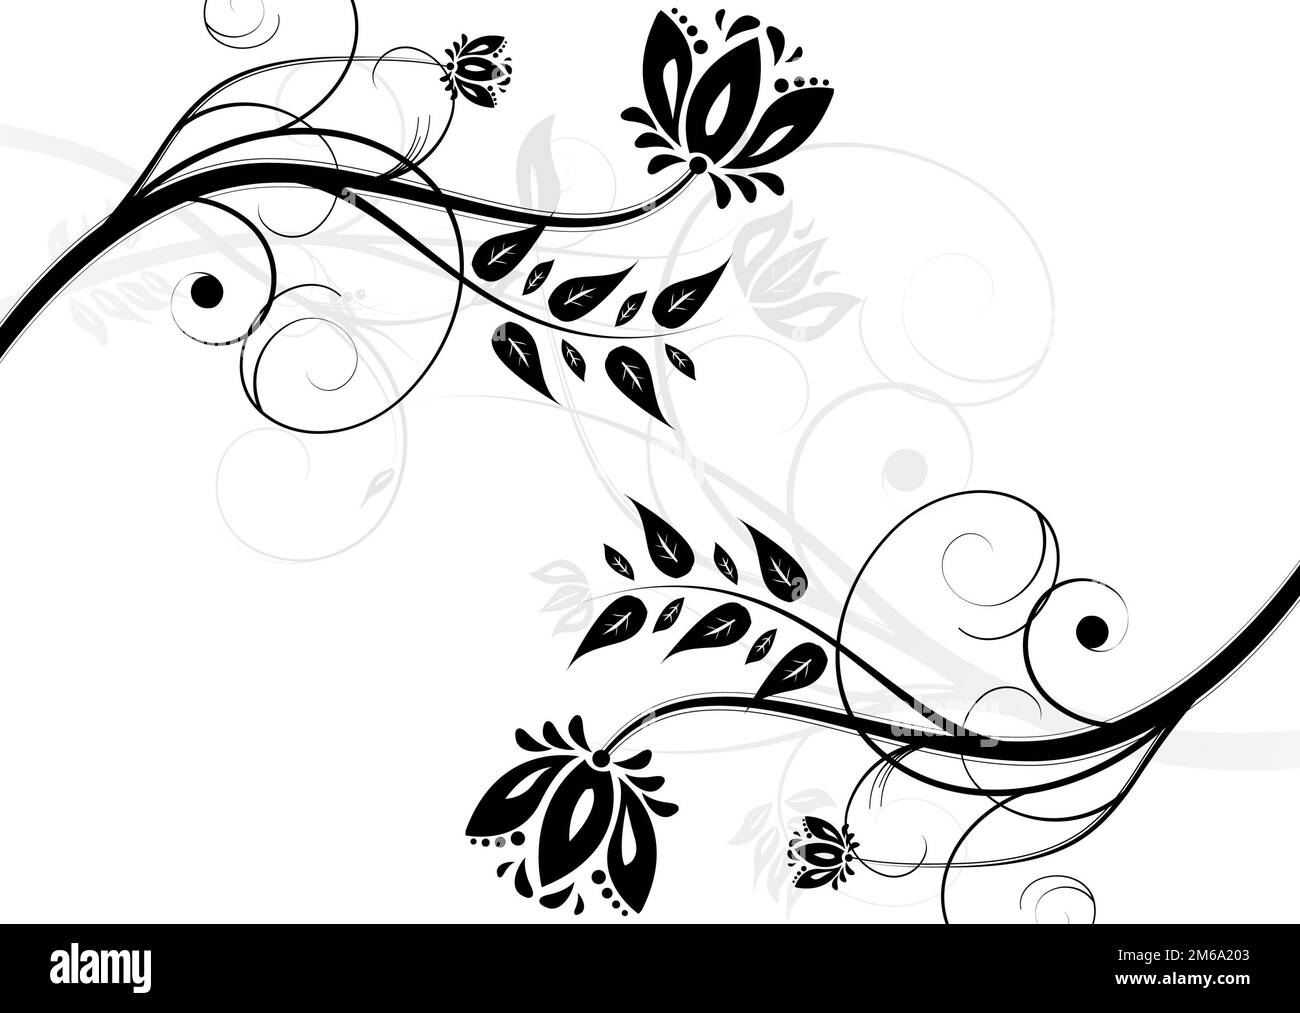 Black and white floral background Stock Photo